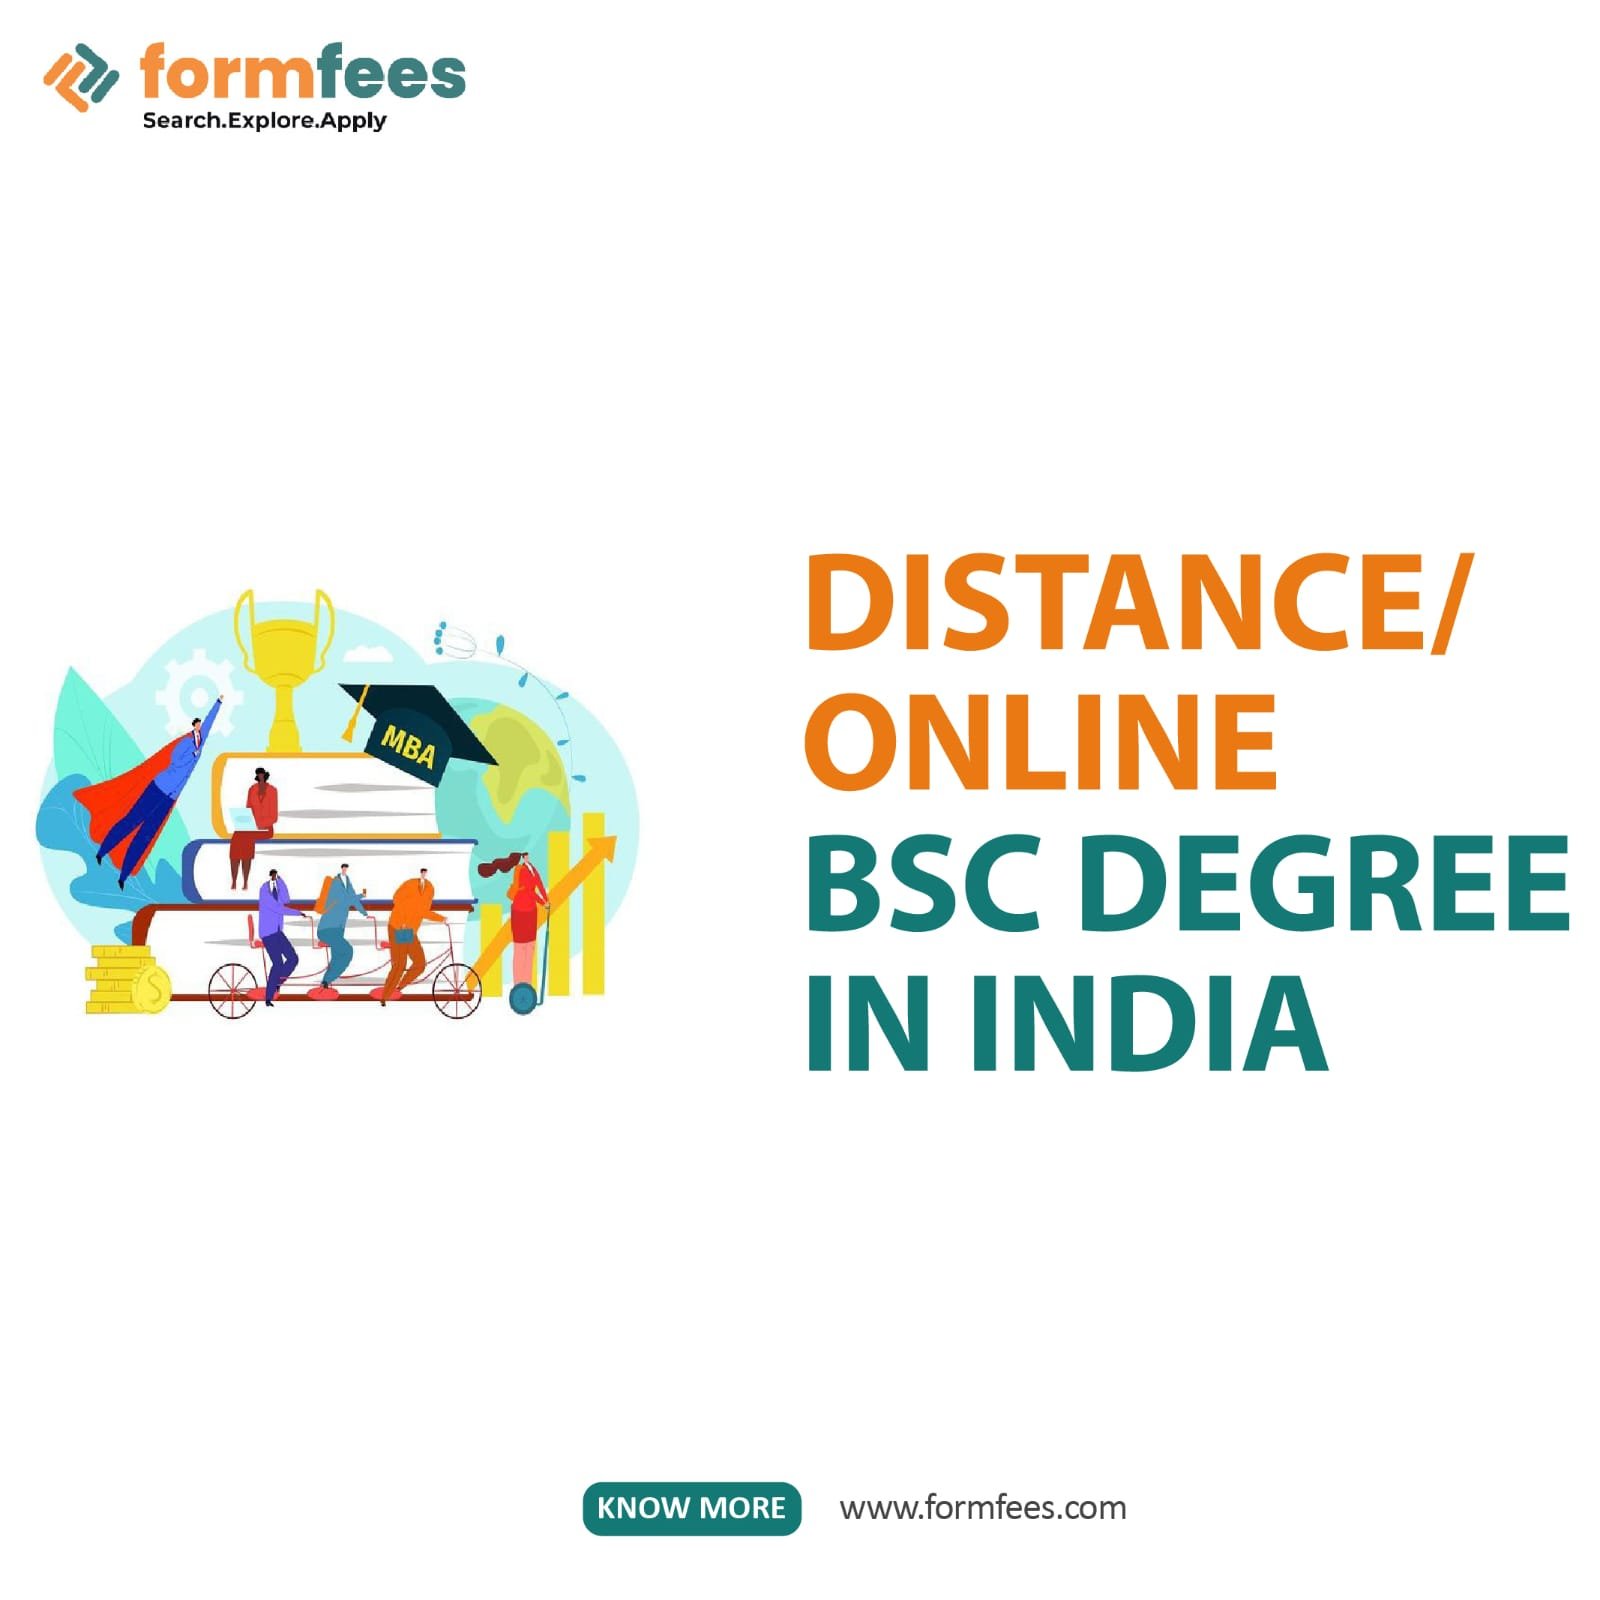 Distance/Online BSC Degree in India